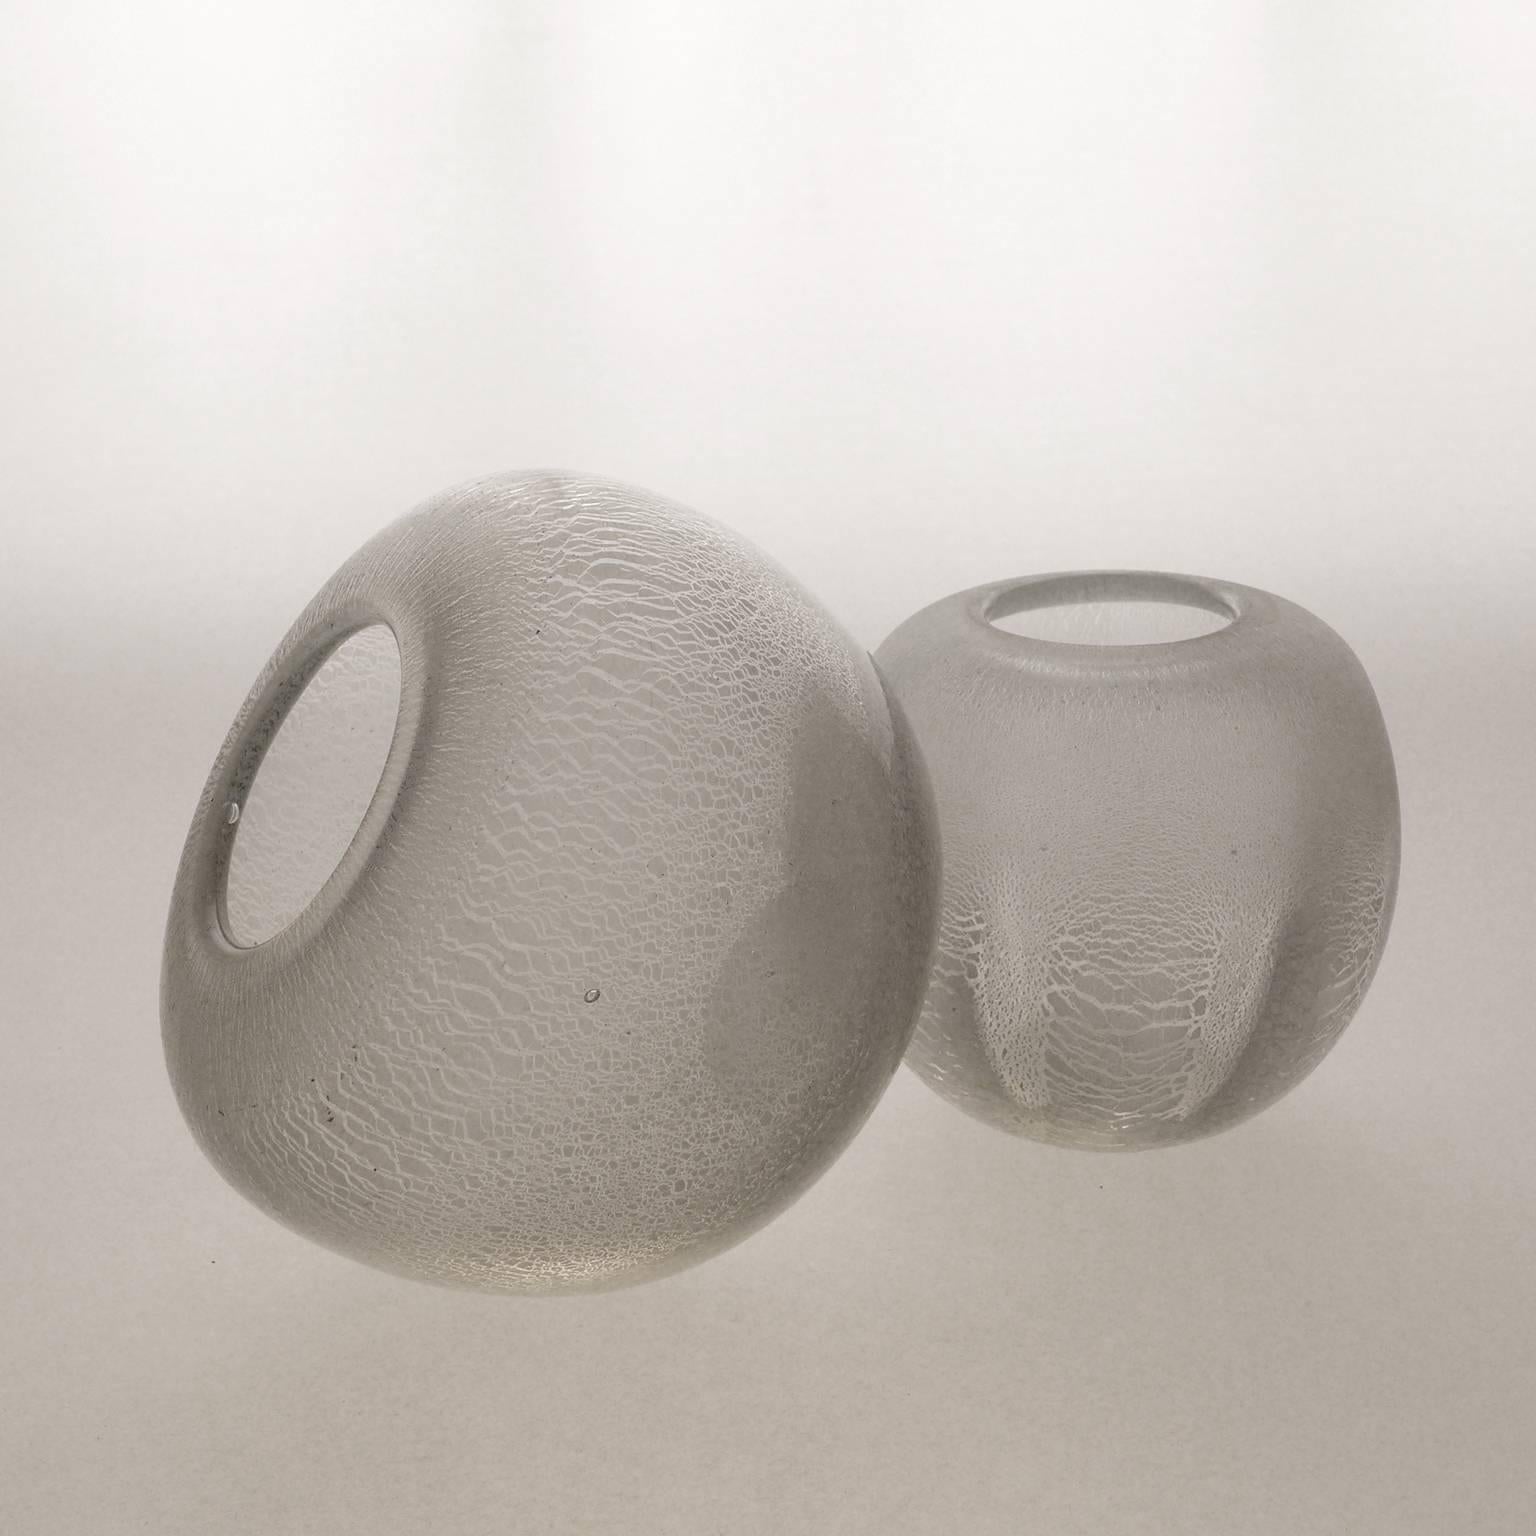 A pair of Art Deco 'Tin Crackel' vases attributed to W.J. Rozendaal. Produced by Kristalunie Maastricht ca. 1930. This glass is known for clean, simple and organic forms with high production values. These round edges, perfect proportions, and subtle